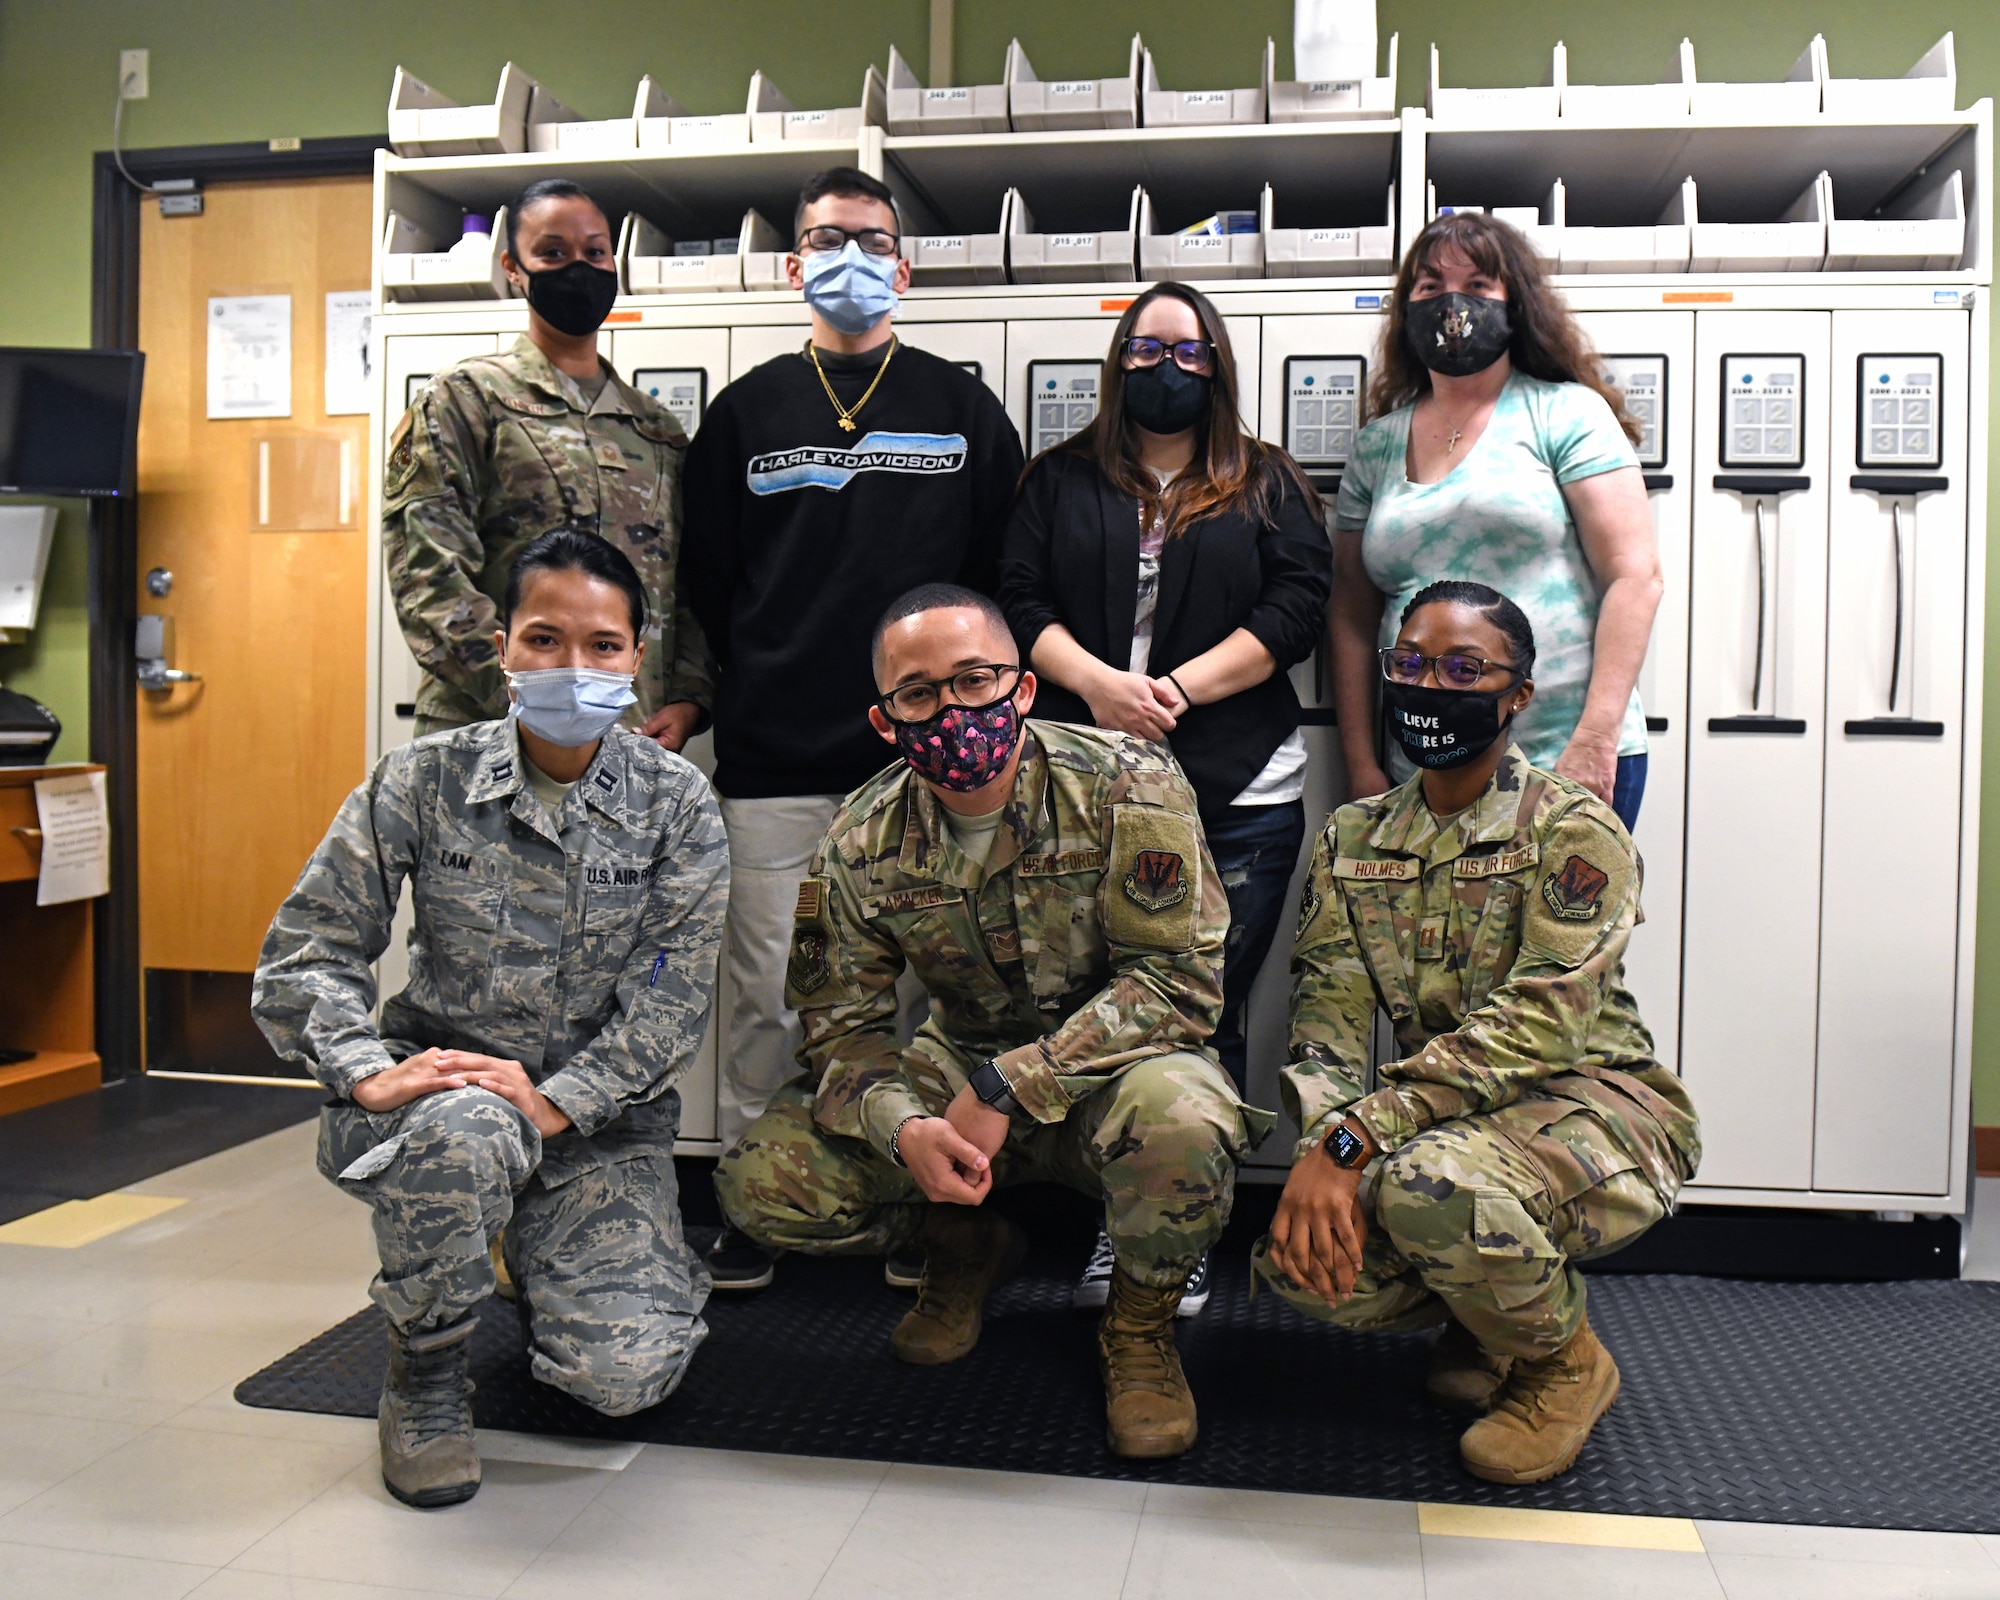 Members of the 9th Healthcare Operations Squadron pharmacy pose for a group photo, Oct. 23, 2020, at Beale Air Force Base, California. The Airmen and civilian contractors working at the pharmacy are an integral part of keeping Airmen and their families healthy. (U.S. Air Force photo by Airman 1st Class Luis A. Ruiz-Vazquez)